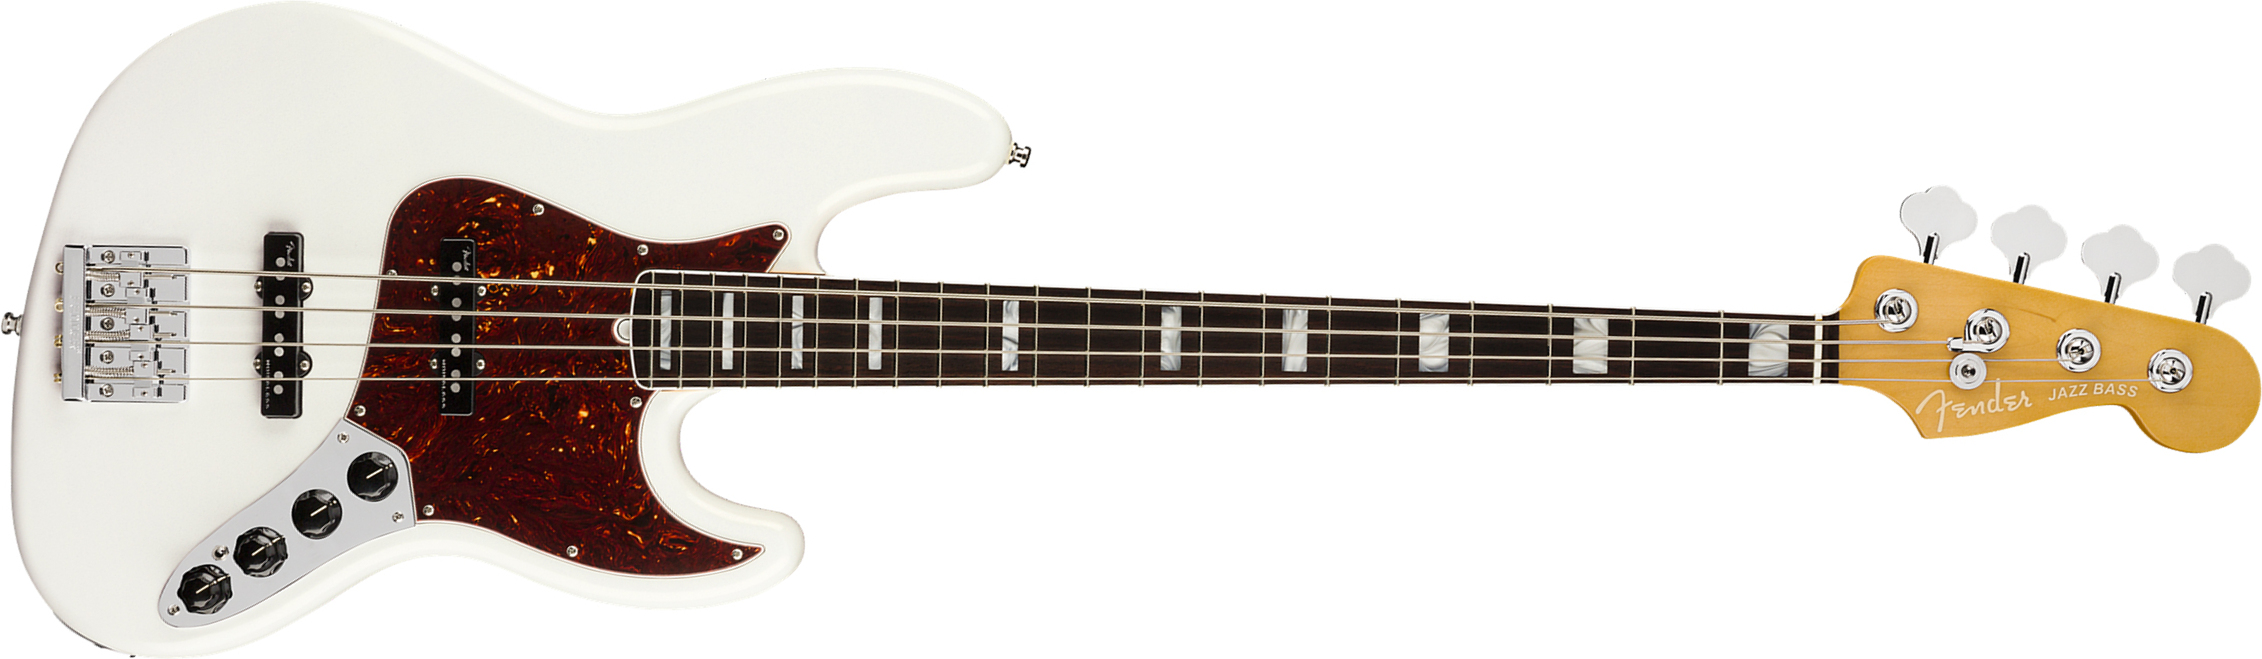 Fender Jazz Bass American Ultra 2019 Usa Rw - Arctic Pearl - Solid body electric bass - Main picture